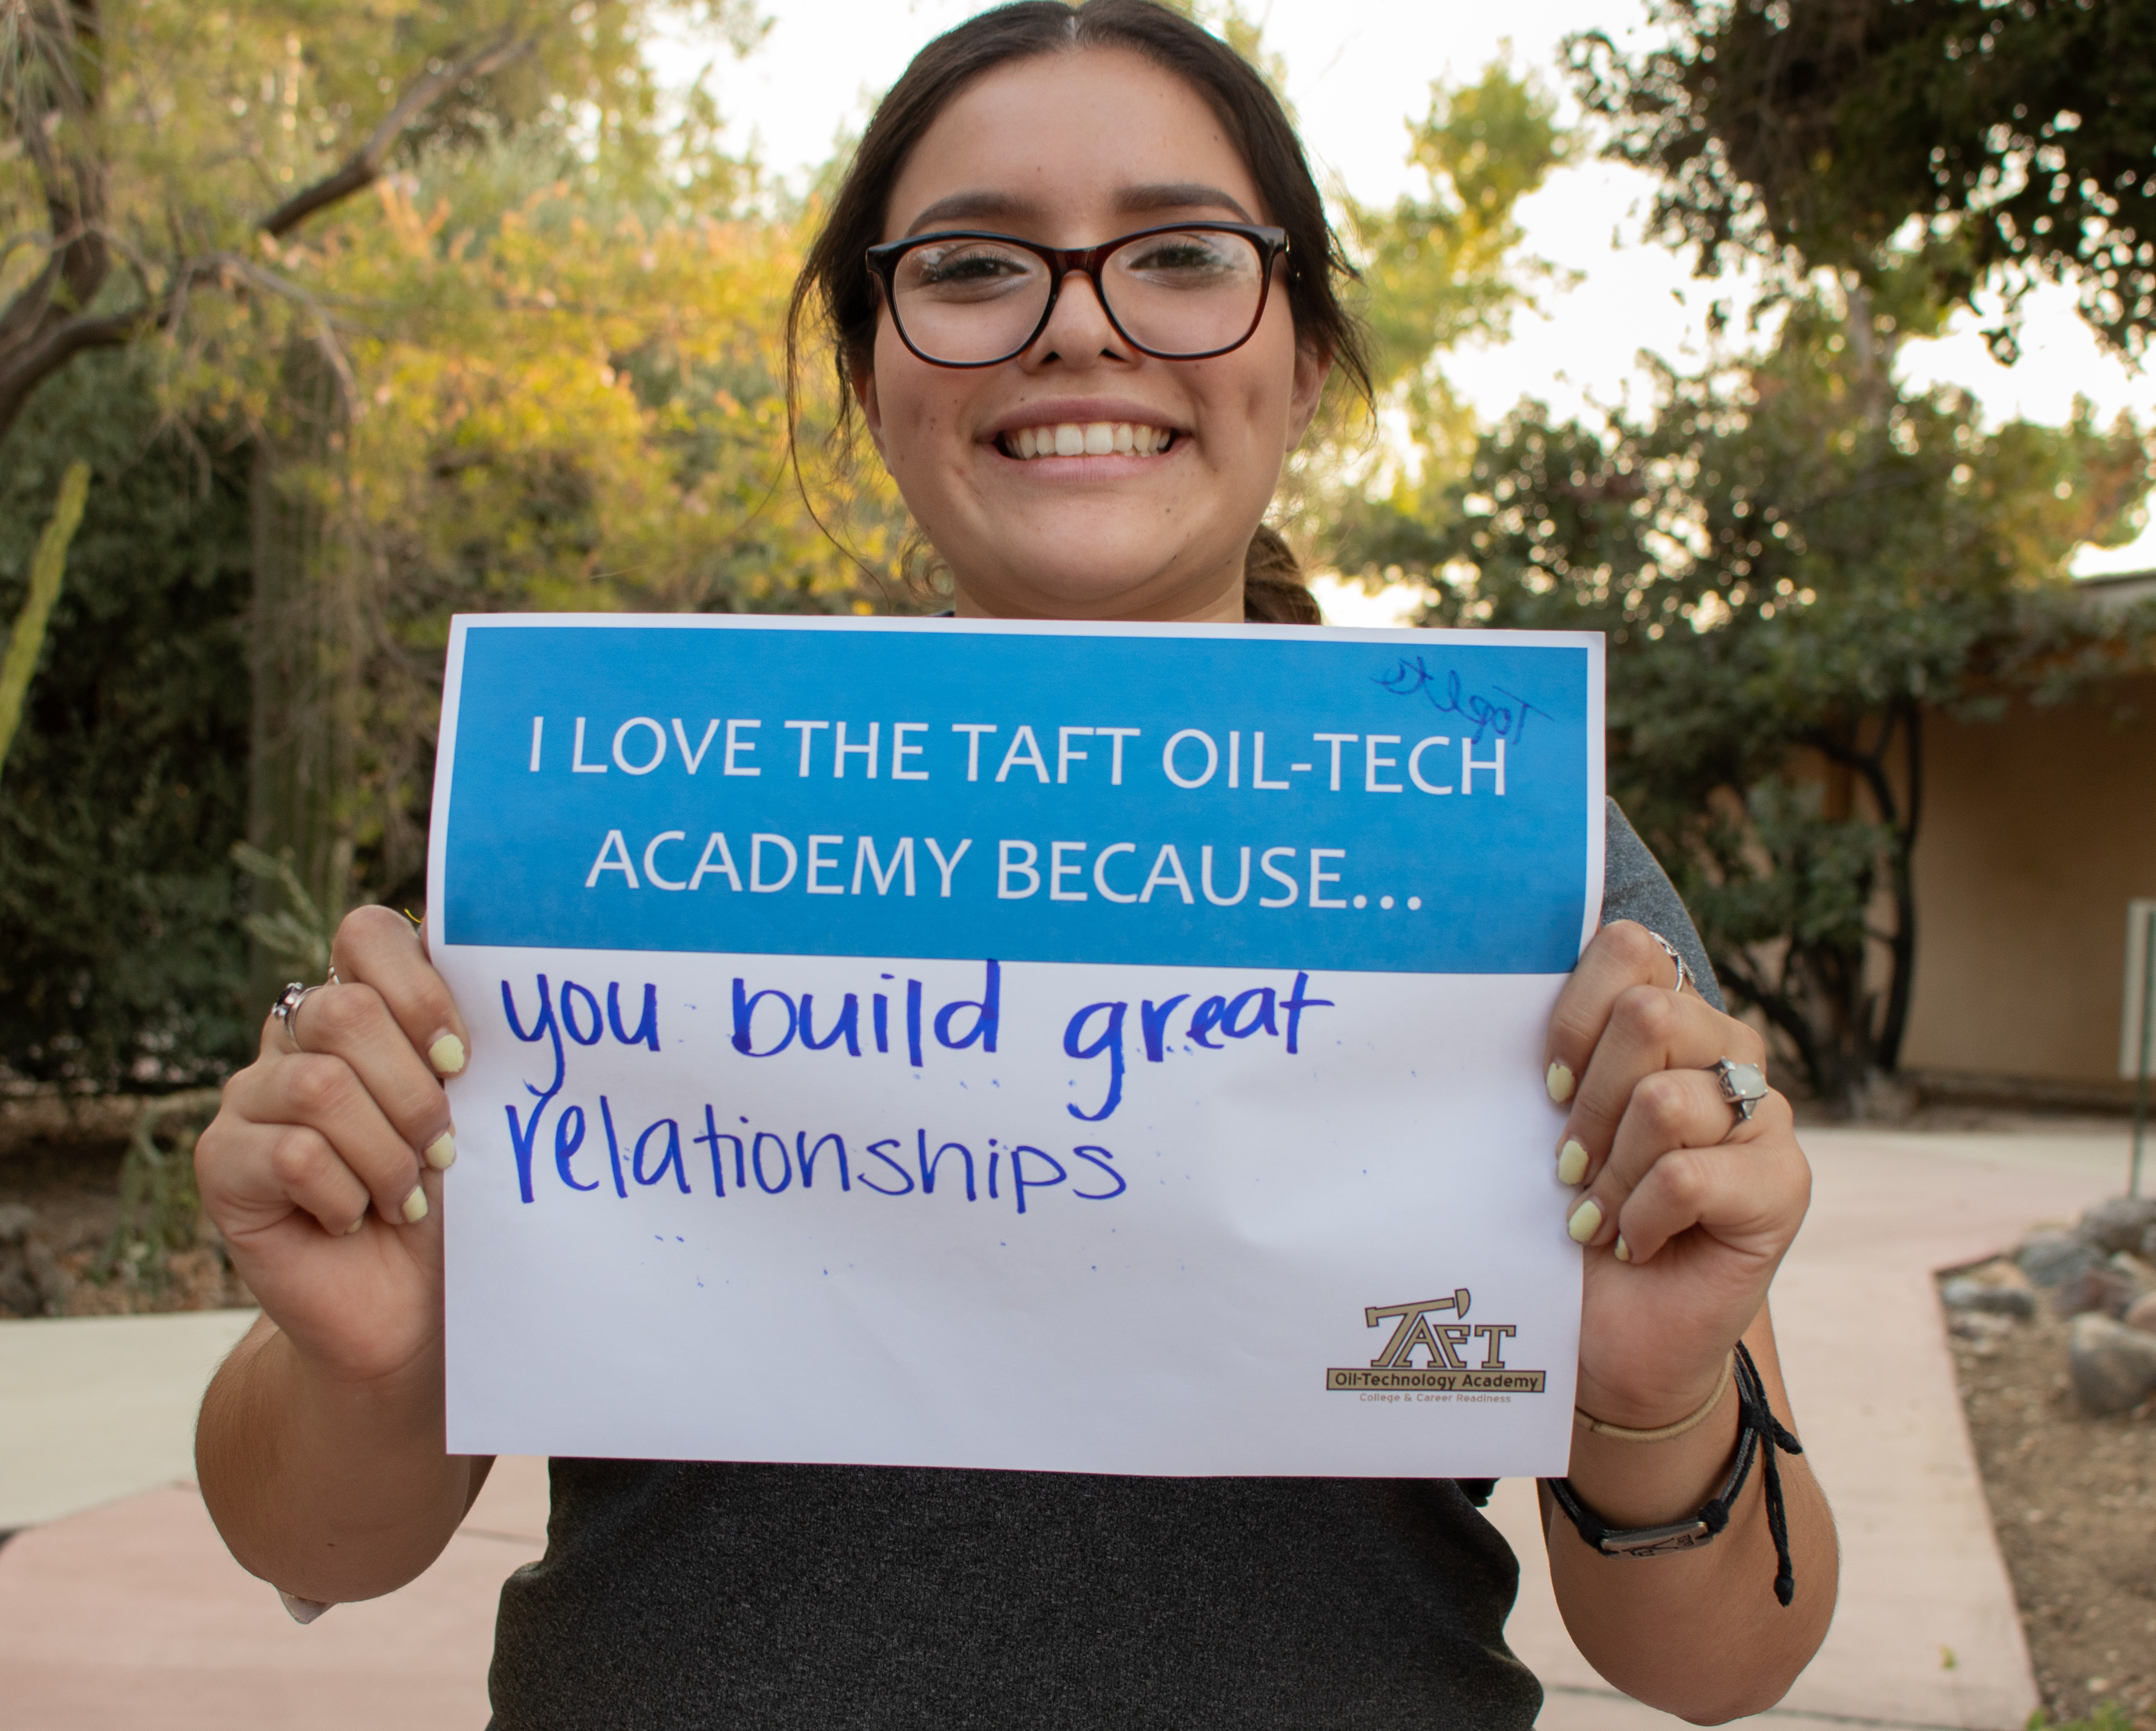 Student Christina - "I love Taft Oil-Tech Academy because...you build great relationships"